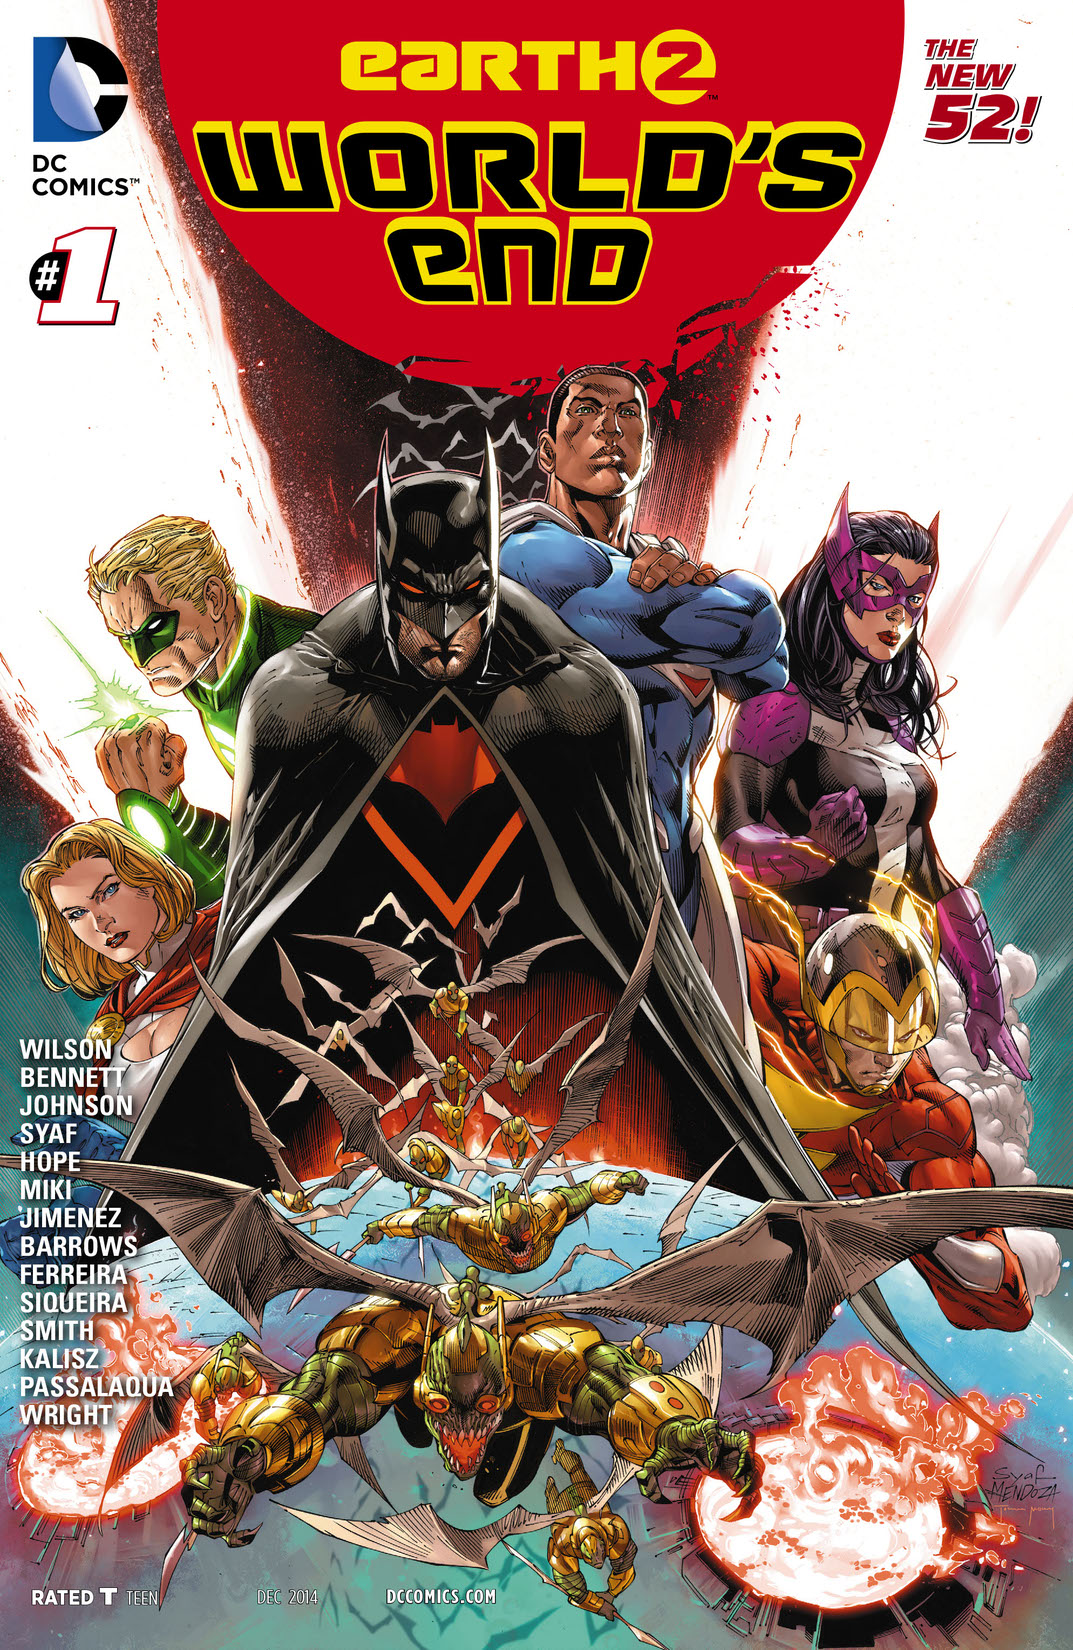 Earth 2: World's End #1 preview images